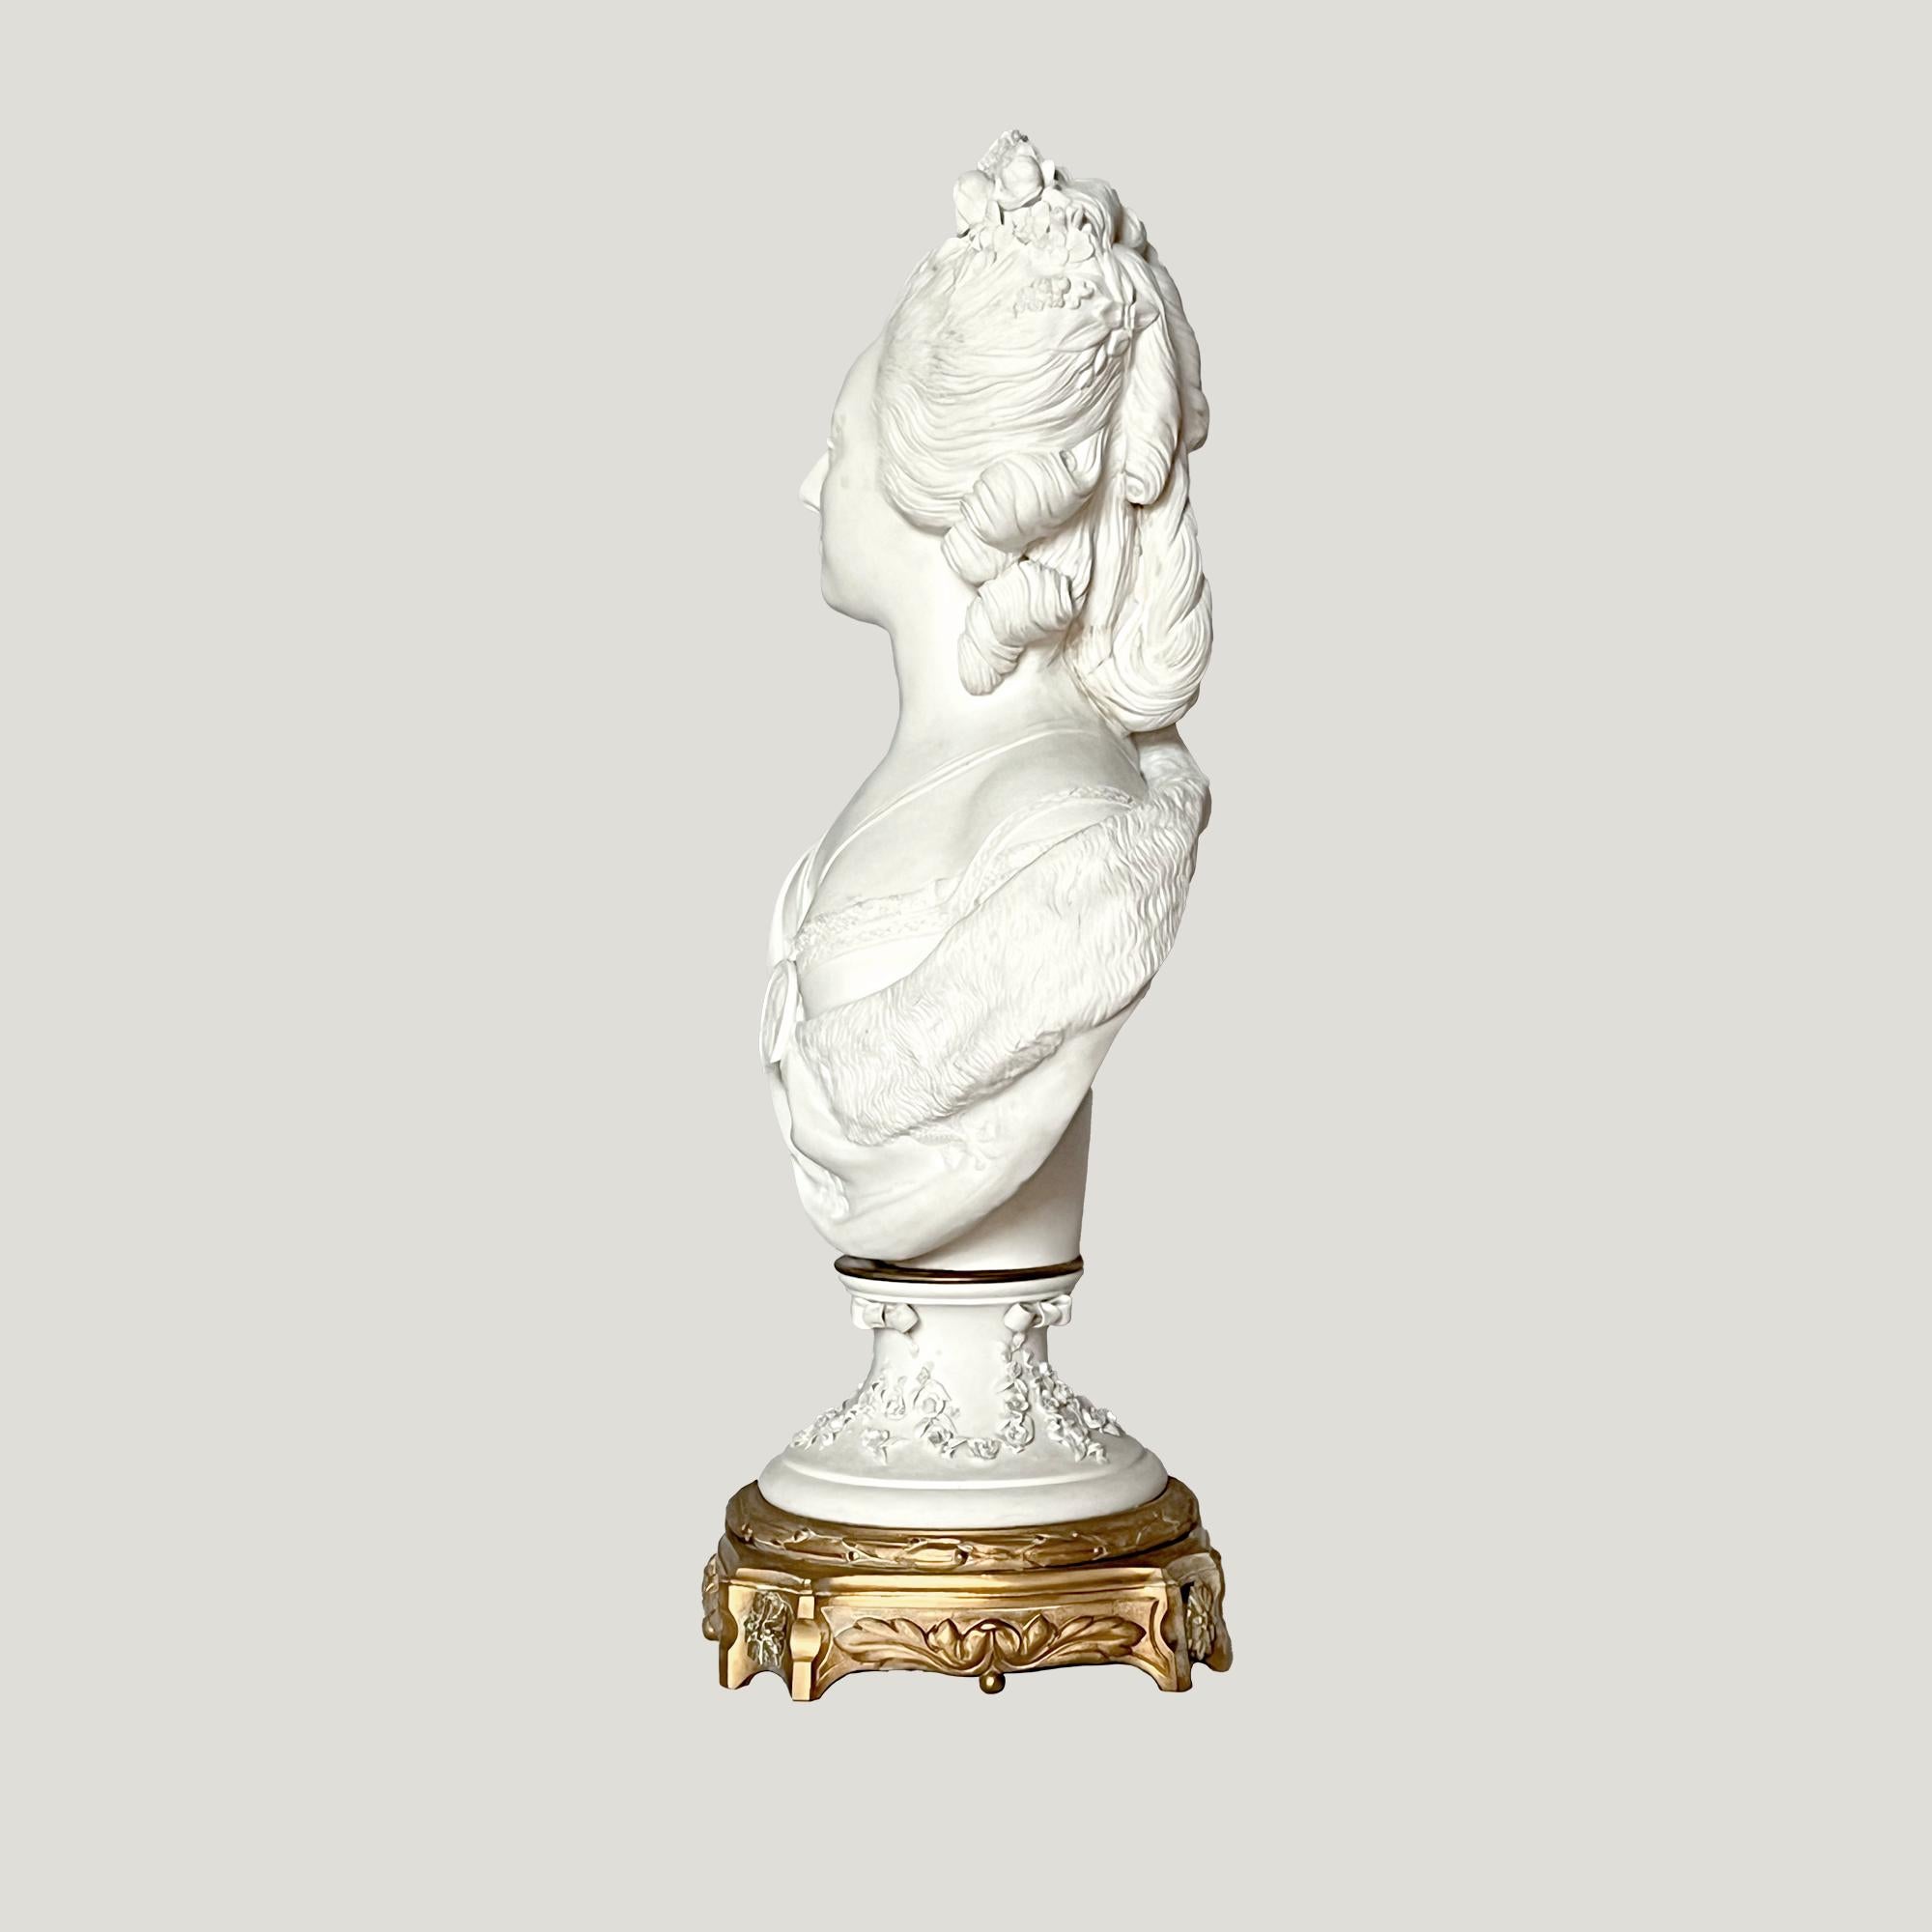 Bust of Marie-Antoinette in biscuit (hard porcelain) from the Royal Manufacture of Sèvres mounted on an ornamented bronze stand.
Signed and Stamped Felix Lecomte (later).
Slight accident in the back.

Felix Lecomte (1737-1817) sculpted